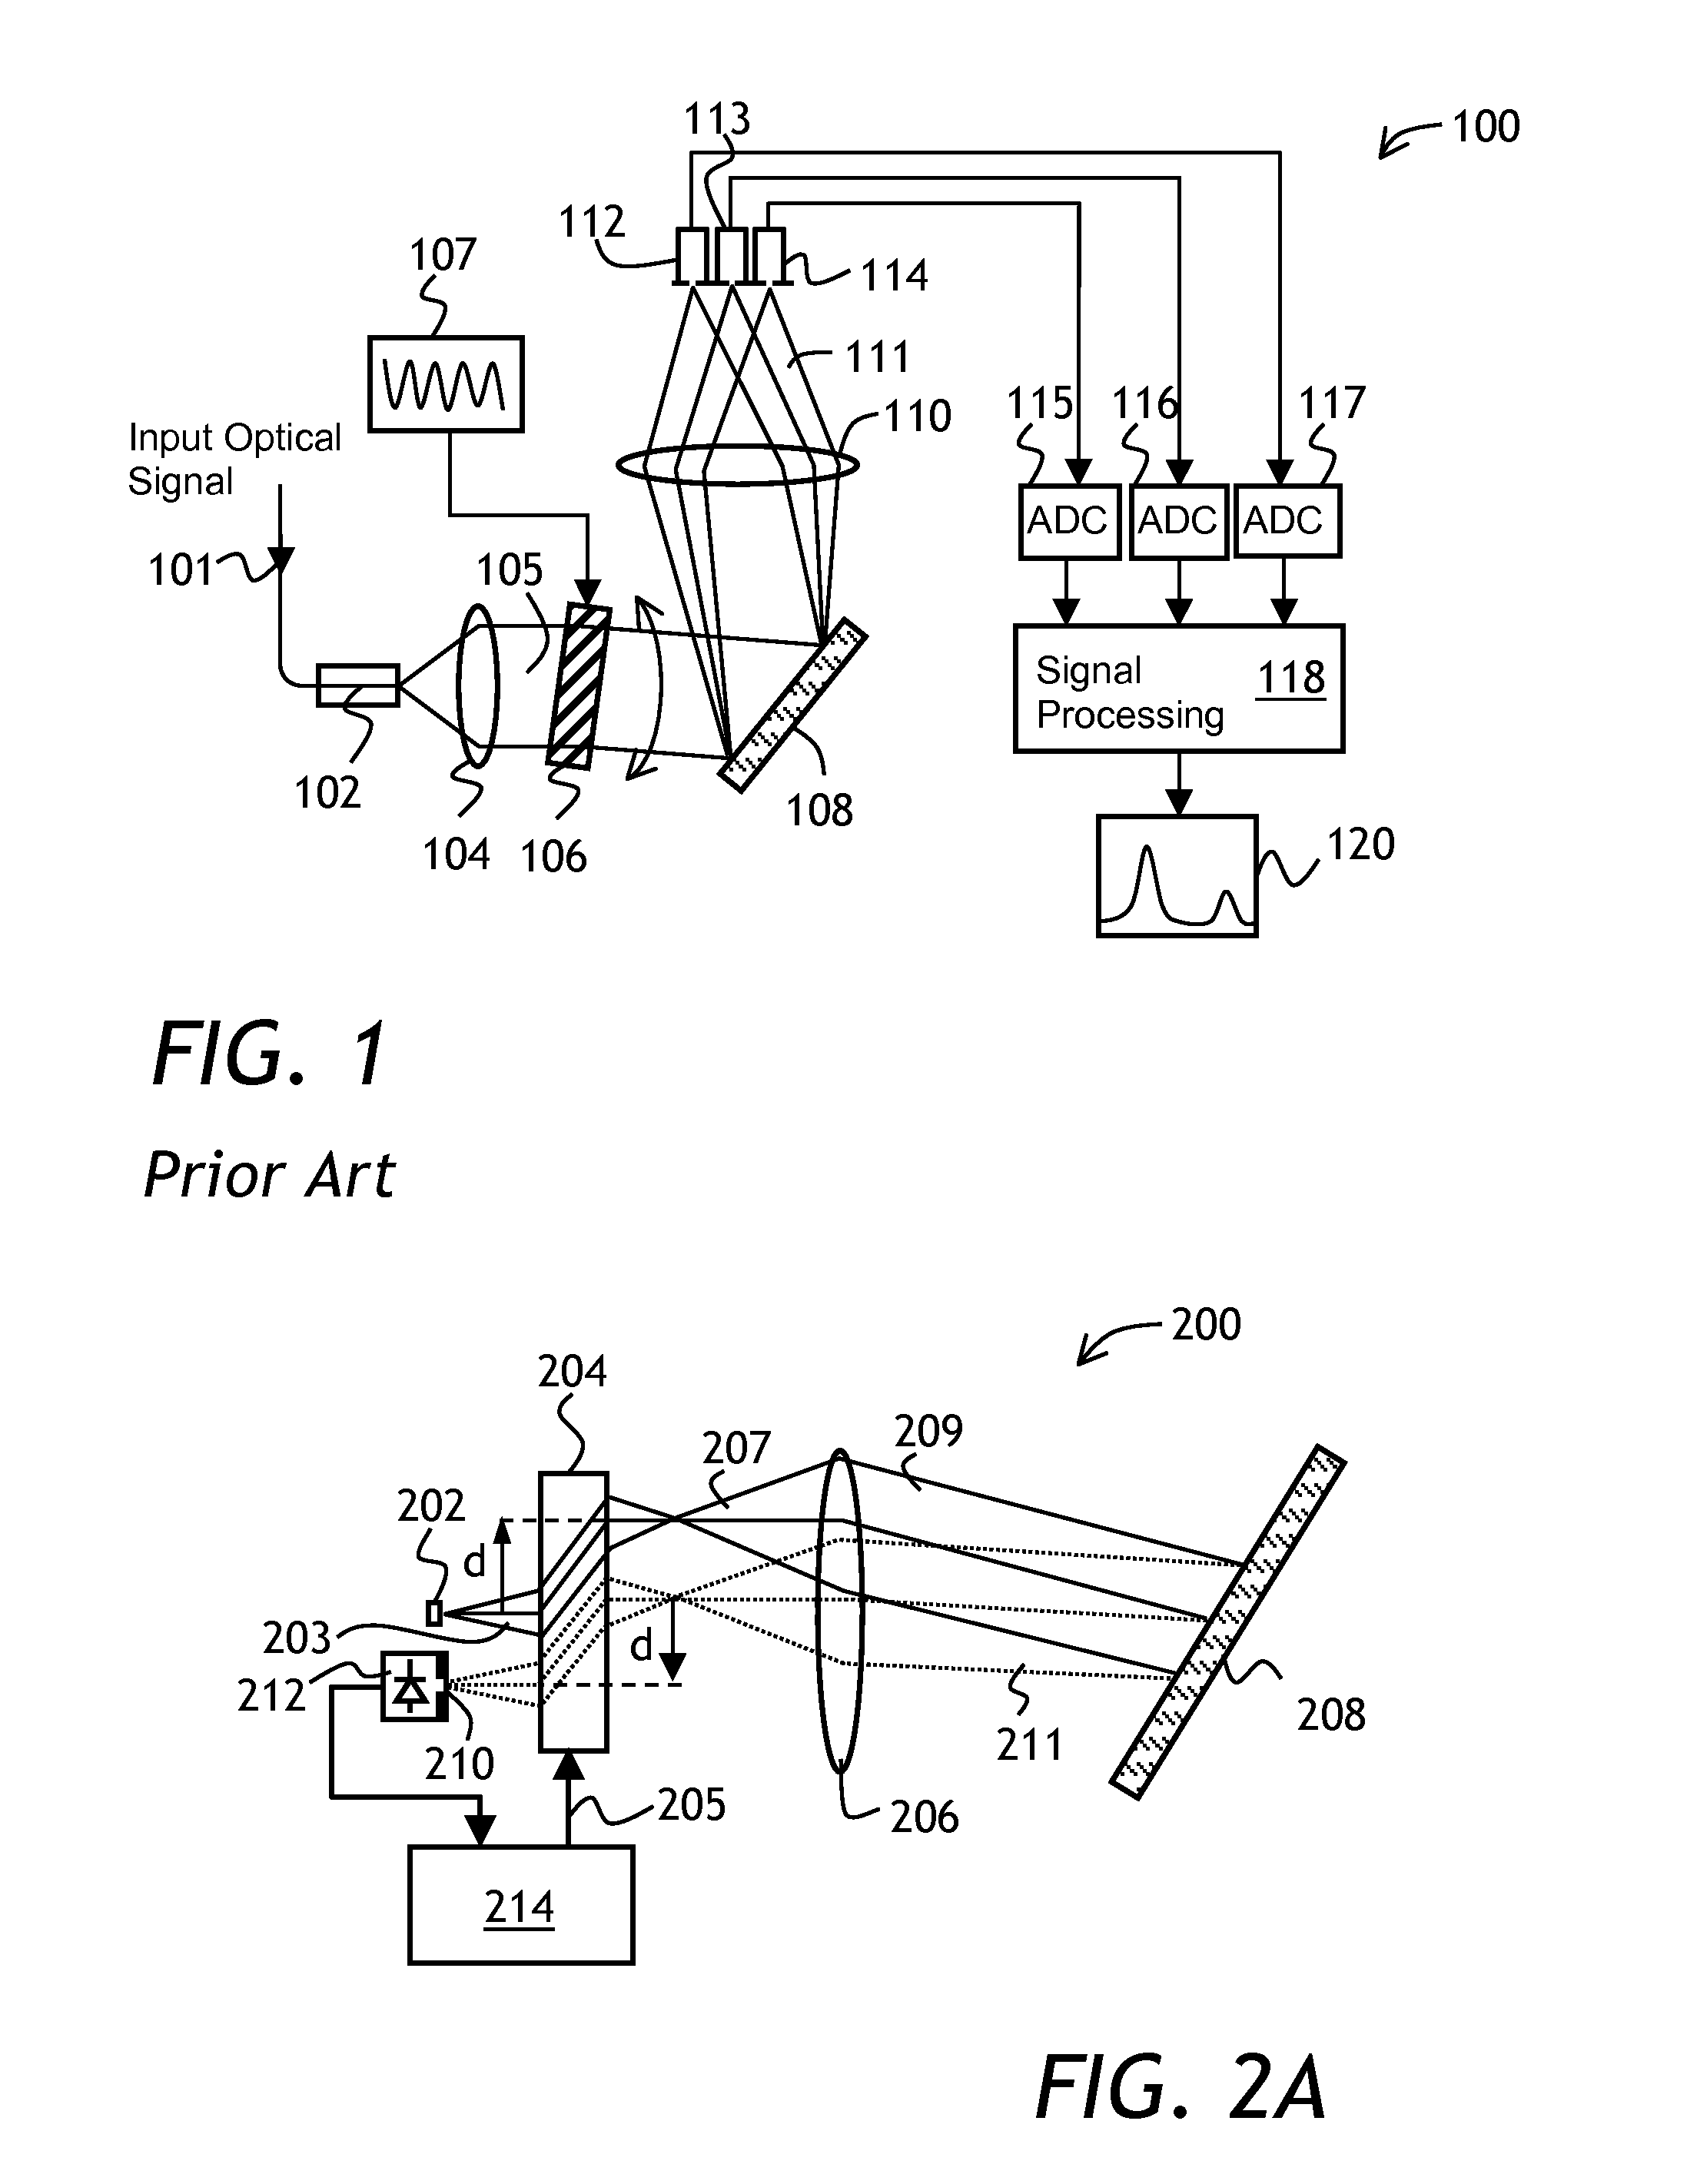 Tunable optical filter and spectrometer